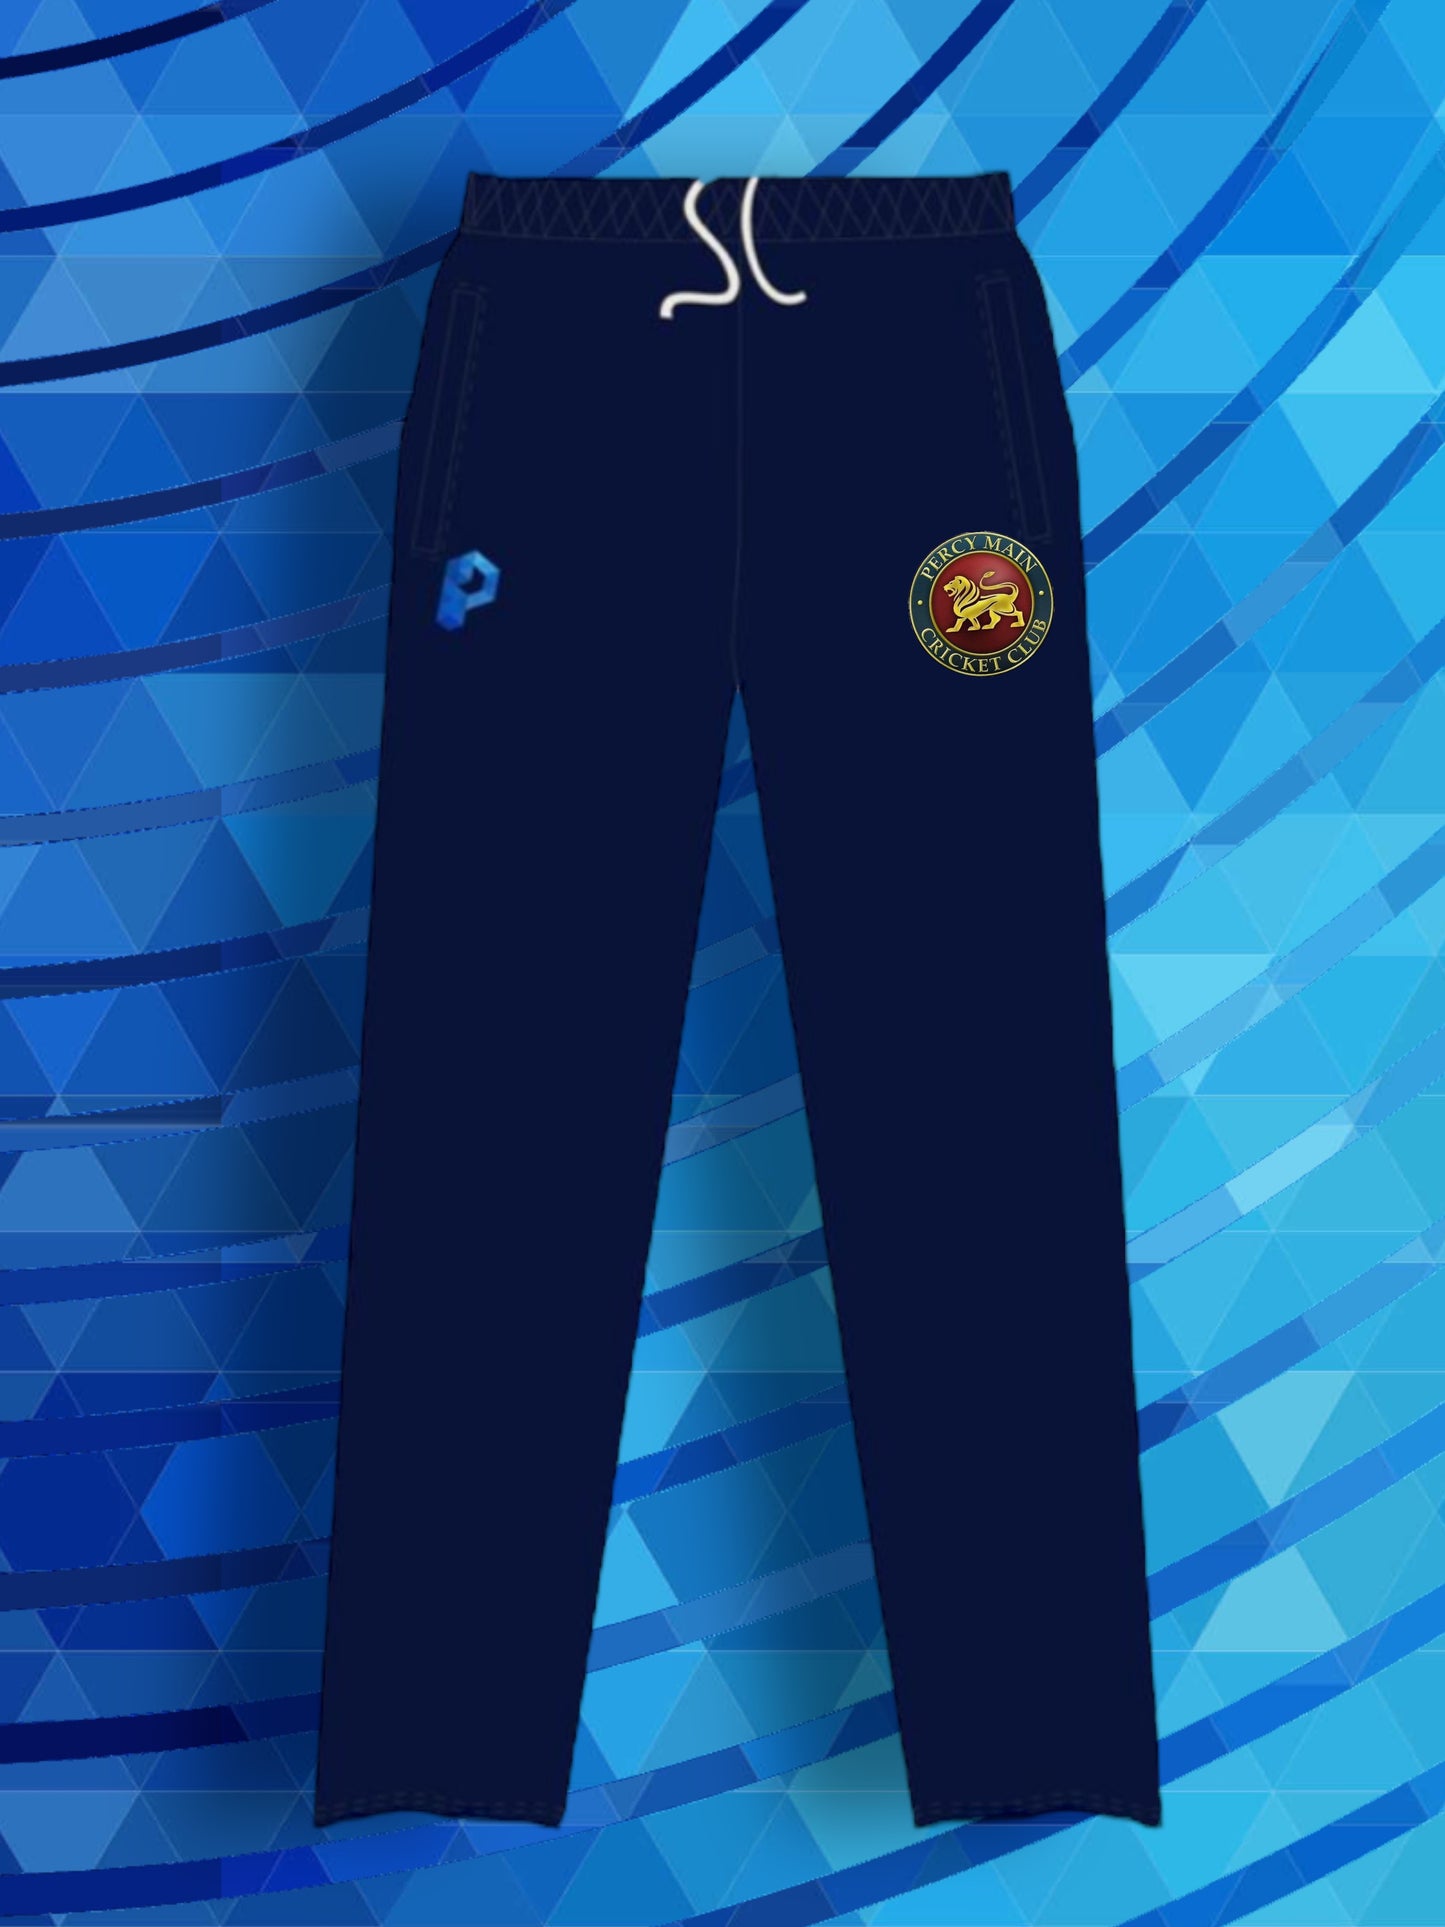 Prophecy Training Trousers - Percy Main Cricket Club